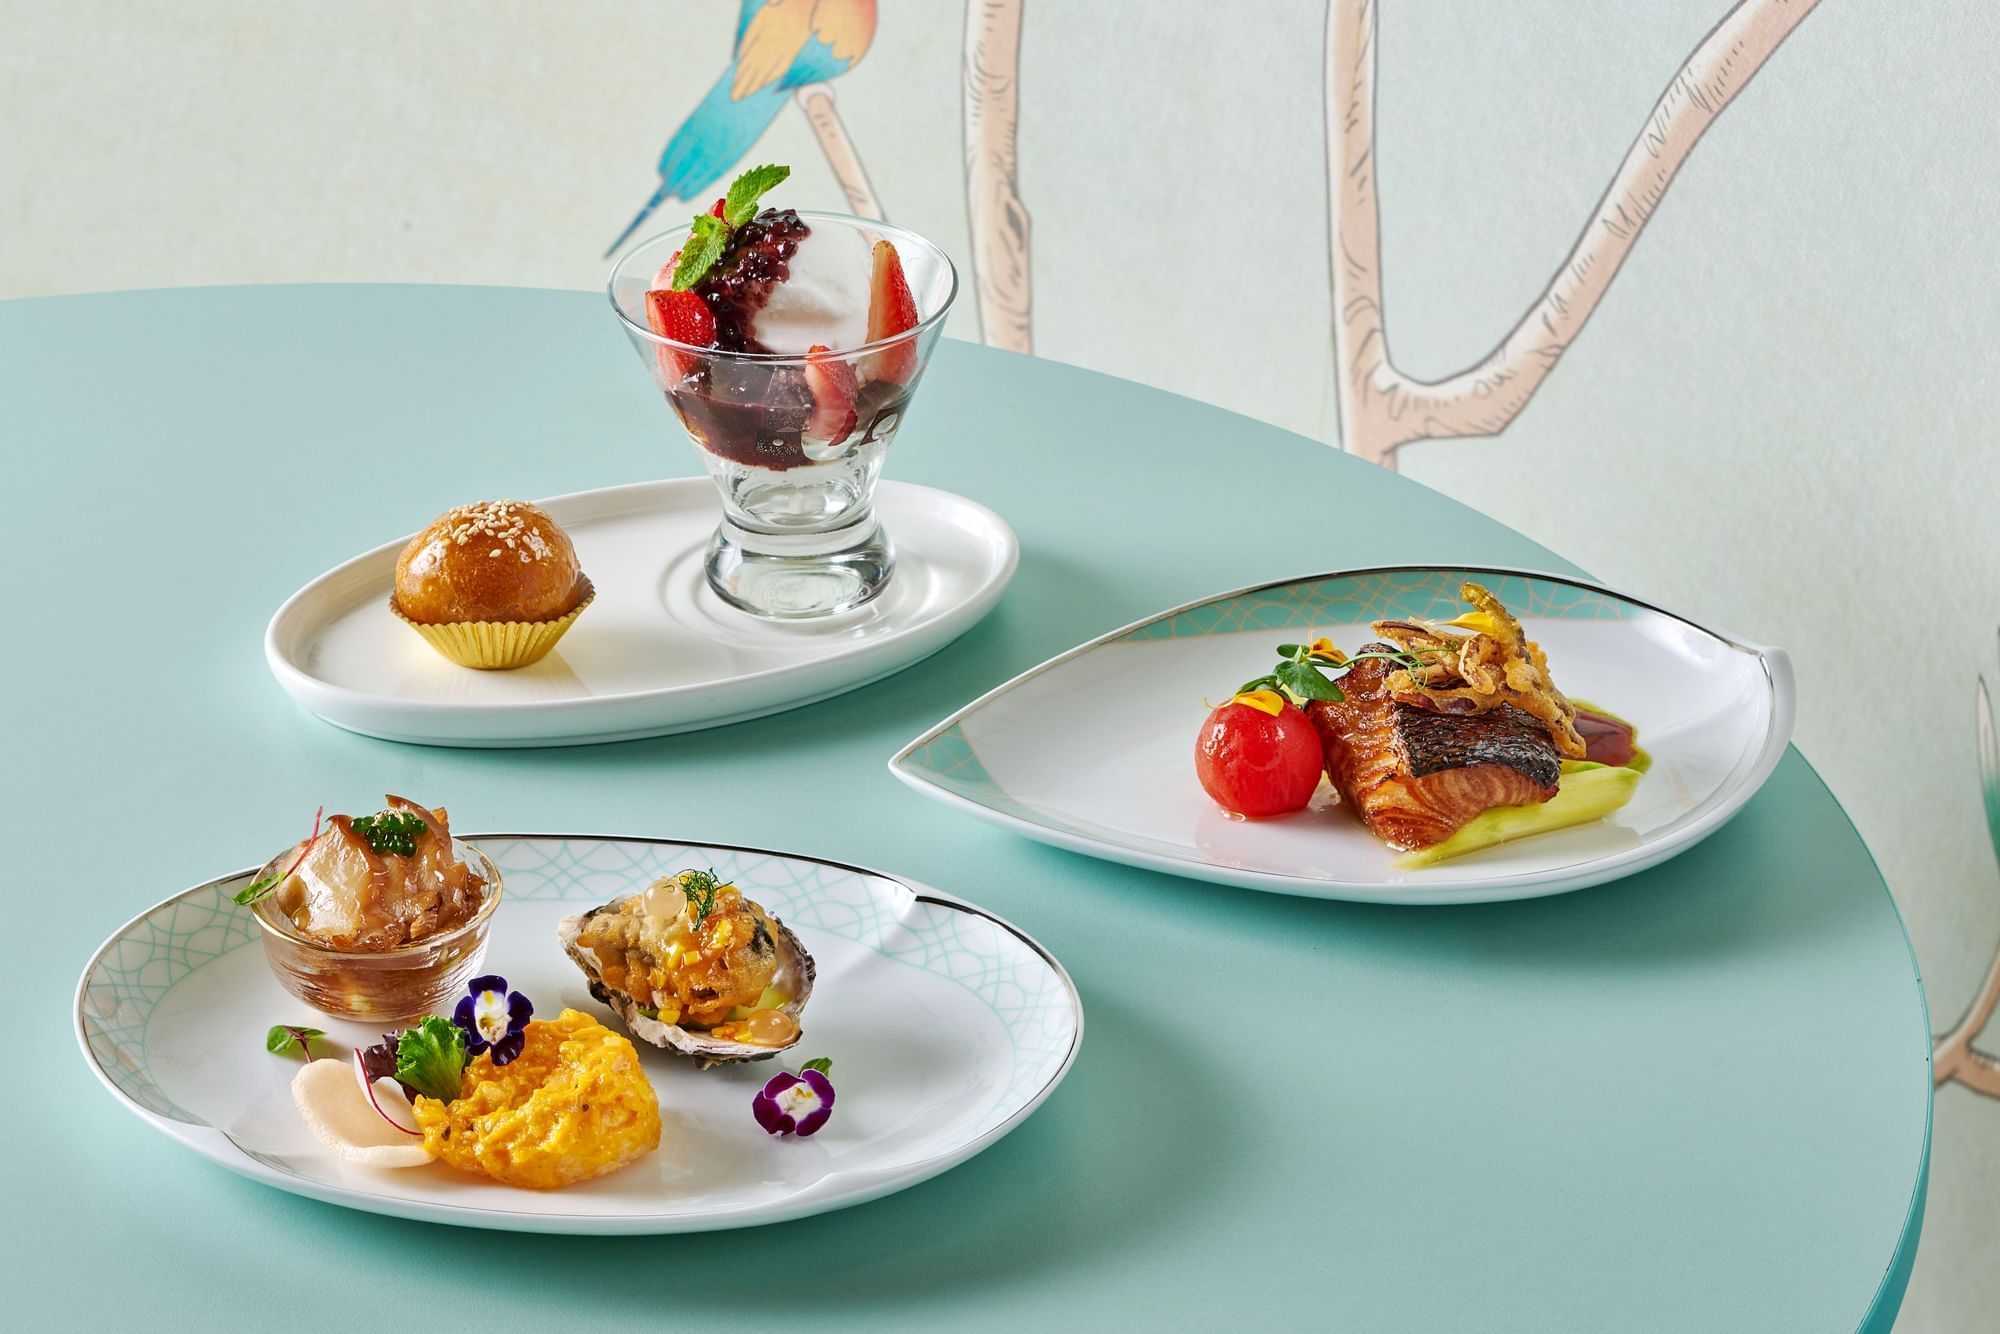 Fine dishes prepared by Chef Leong Yeng at The Fullerton Hotel Singapore